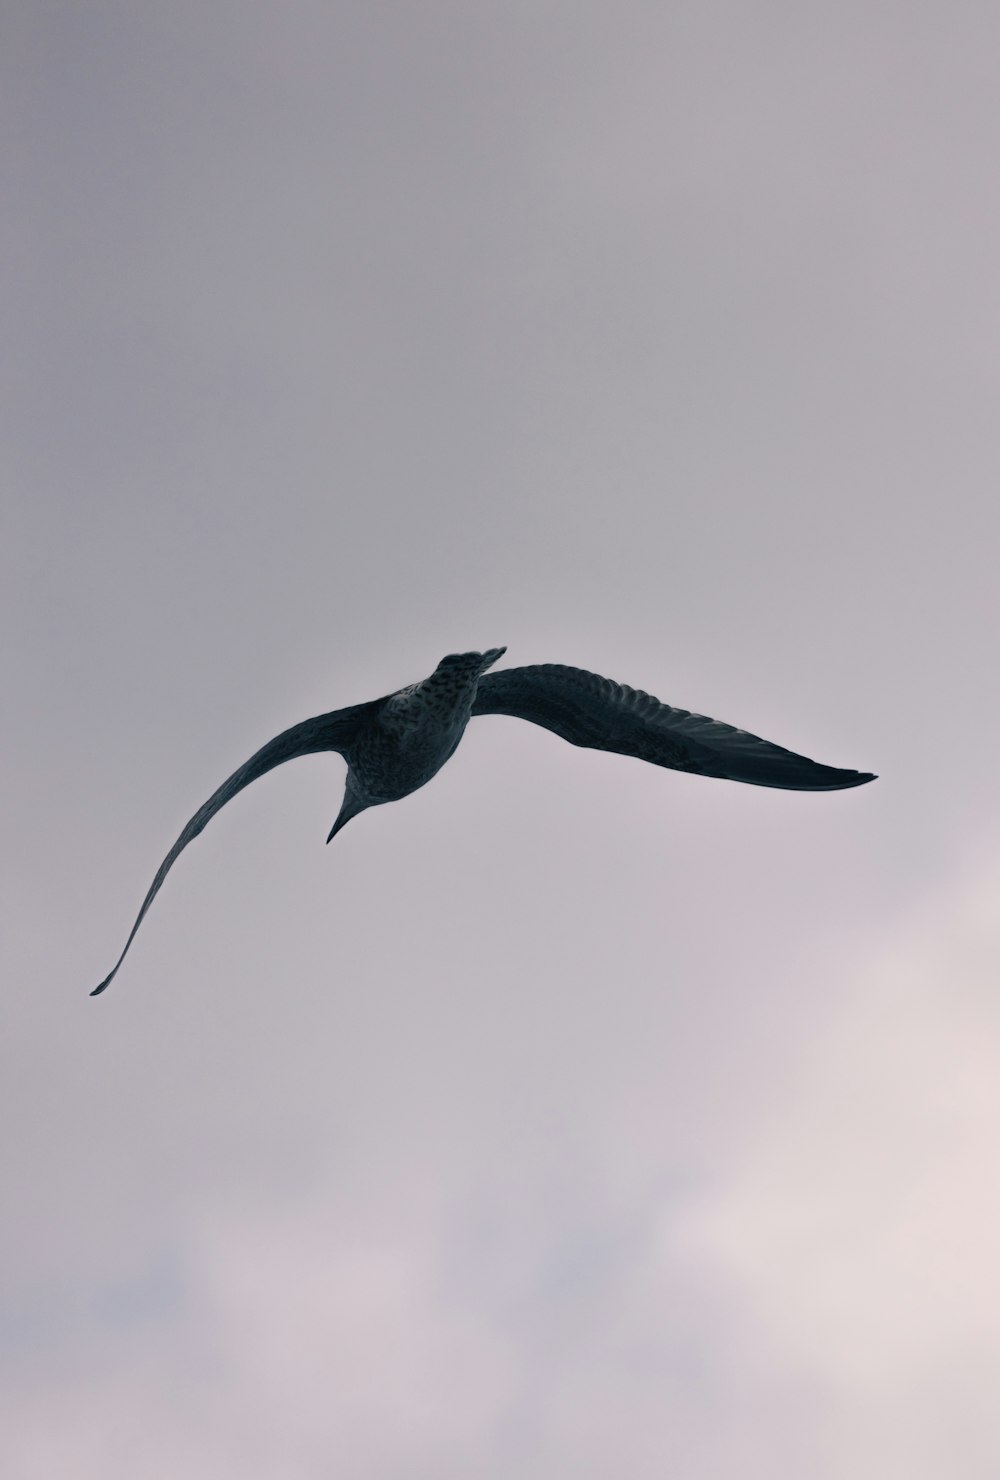 a bird flying through a cloudy sky with a long tail